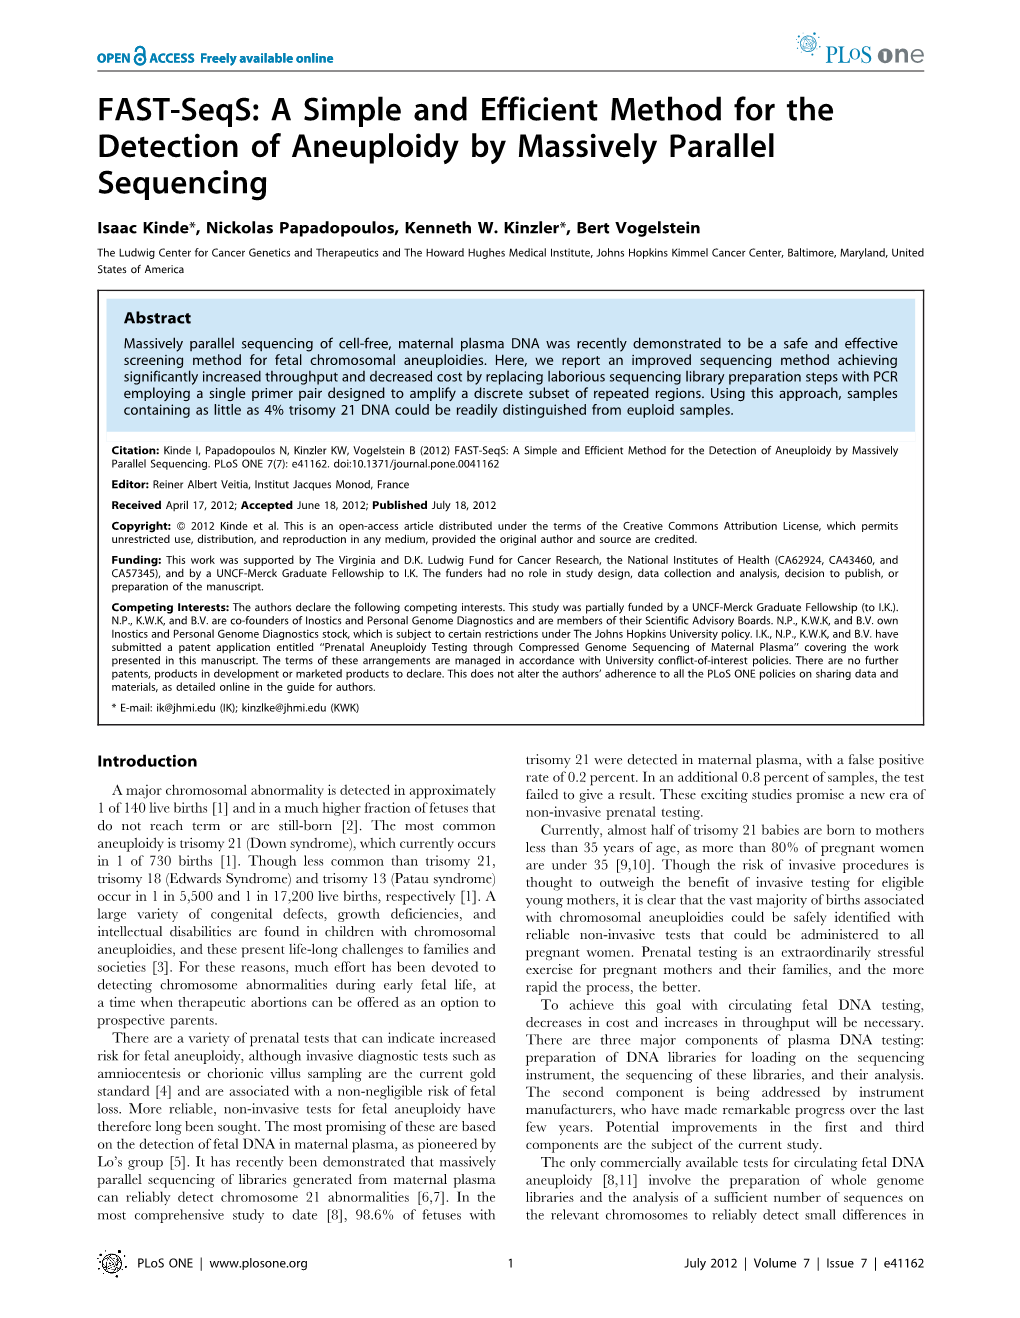 FAST-Seqs: a Simple and Efficient Method for the Detection of Aneuploidy by Massively Parallel Sequencing